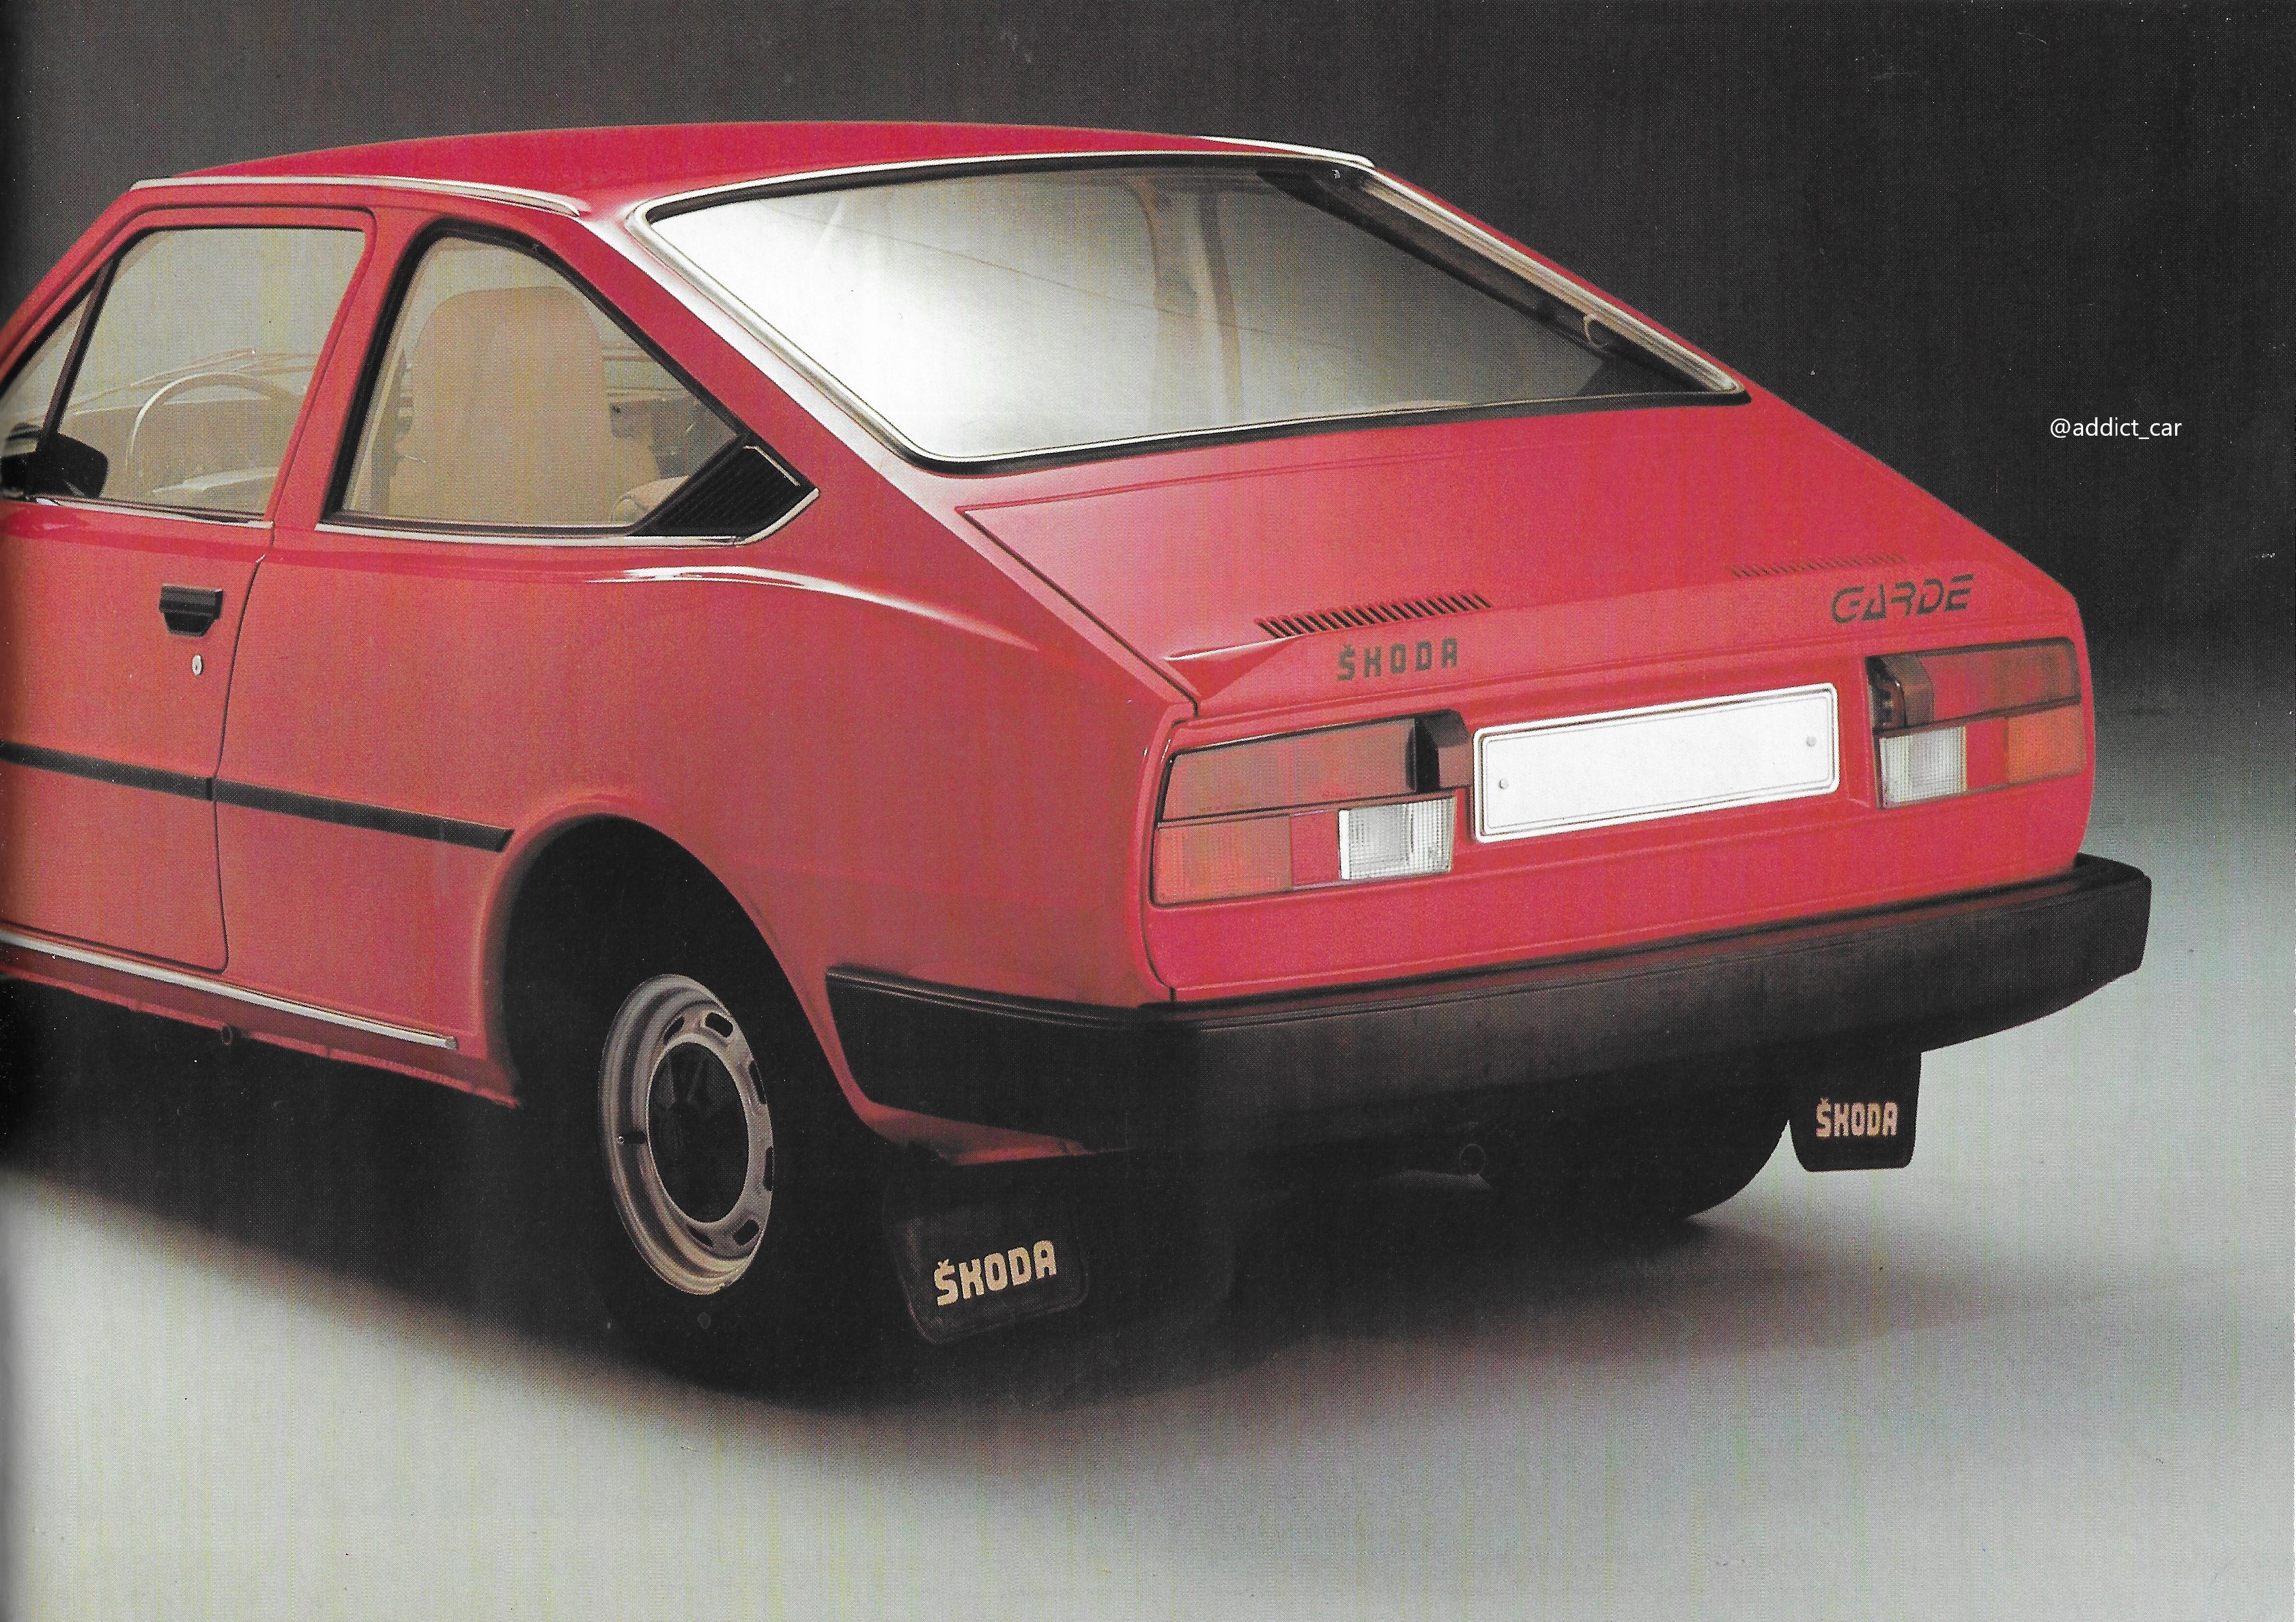 Car Brochure Addict on X: "The Skoda Garde was the original name of the coupé version the company's rear-engined S120/Estelle. First seen in 1981, it was later exported under the Rapid